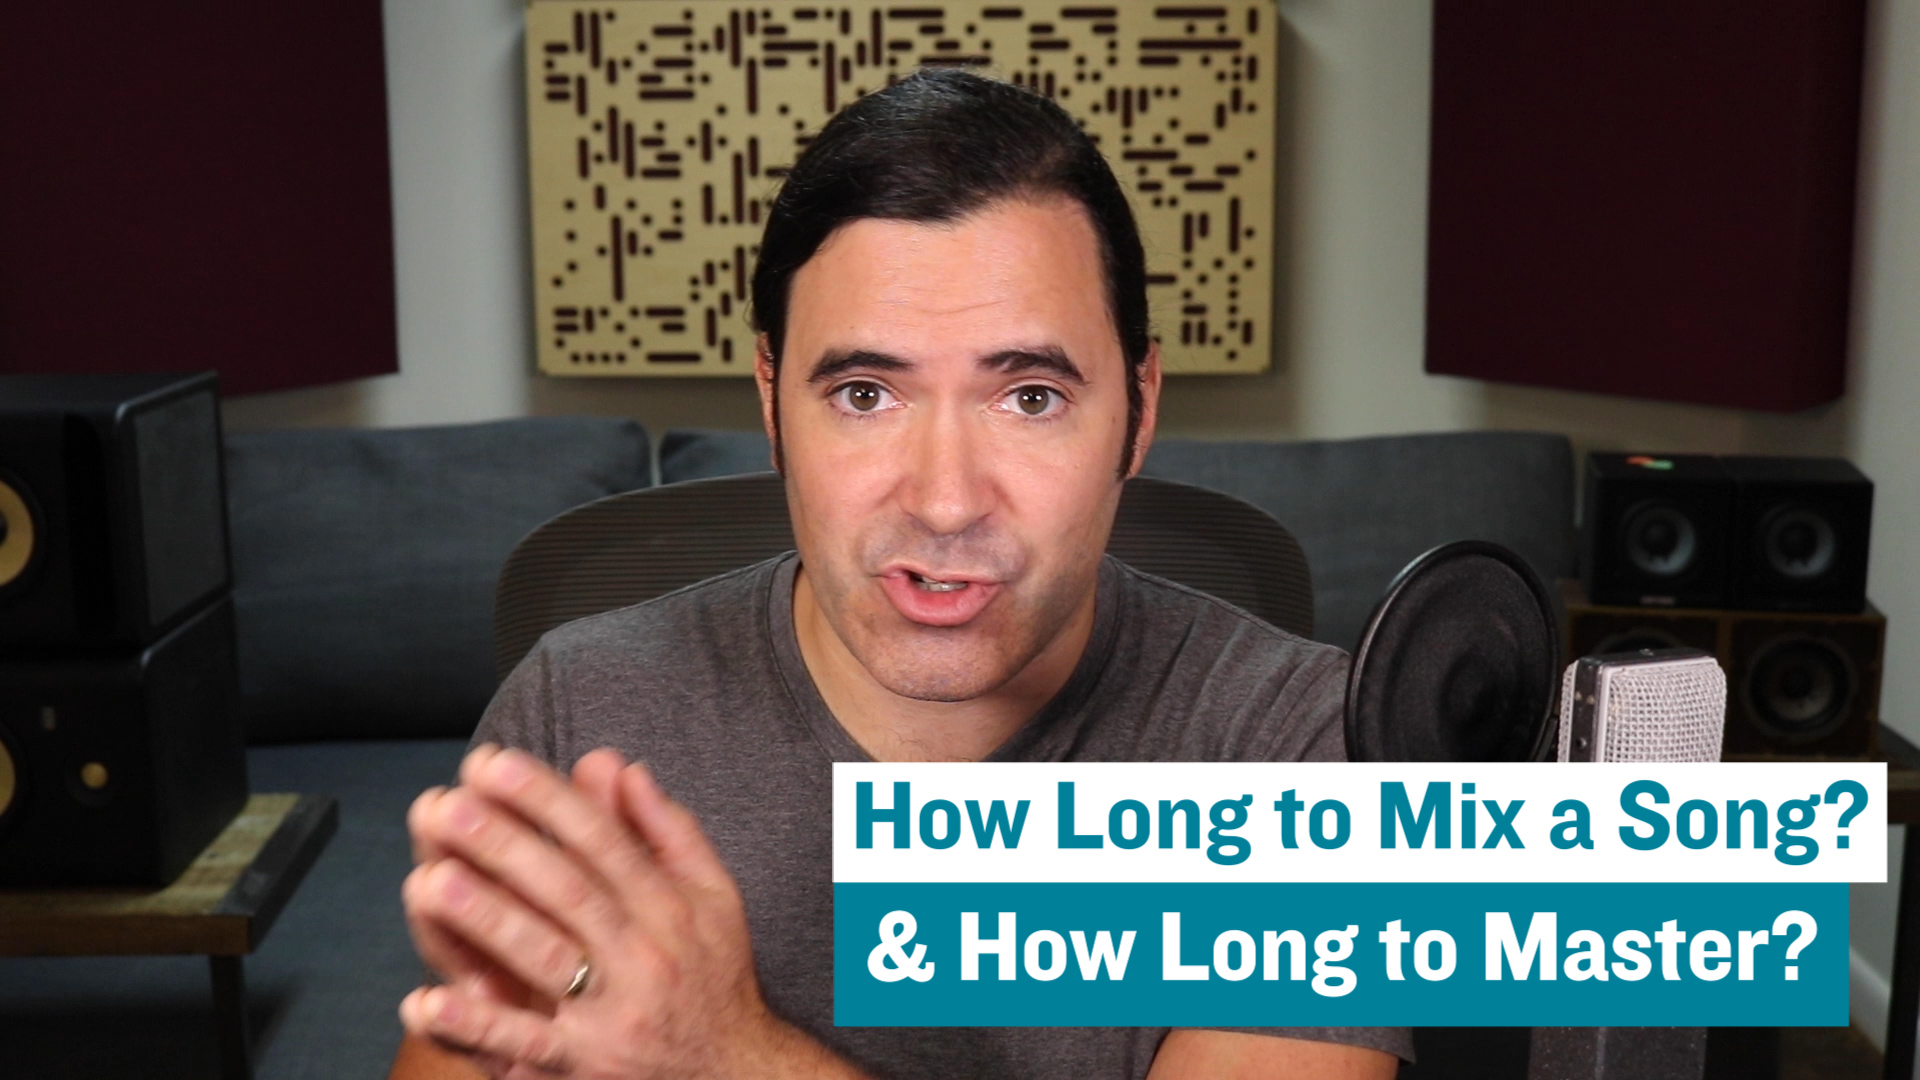 How Long Should it Take To Mix a Song? And How Long to Master a Track?